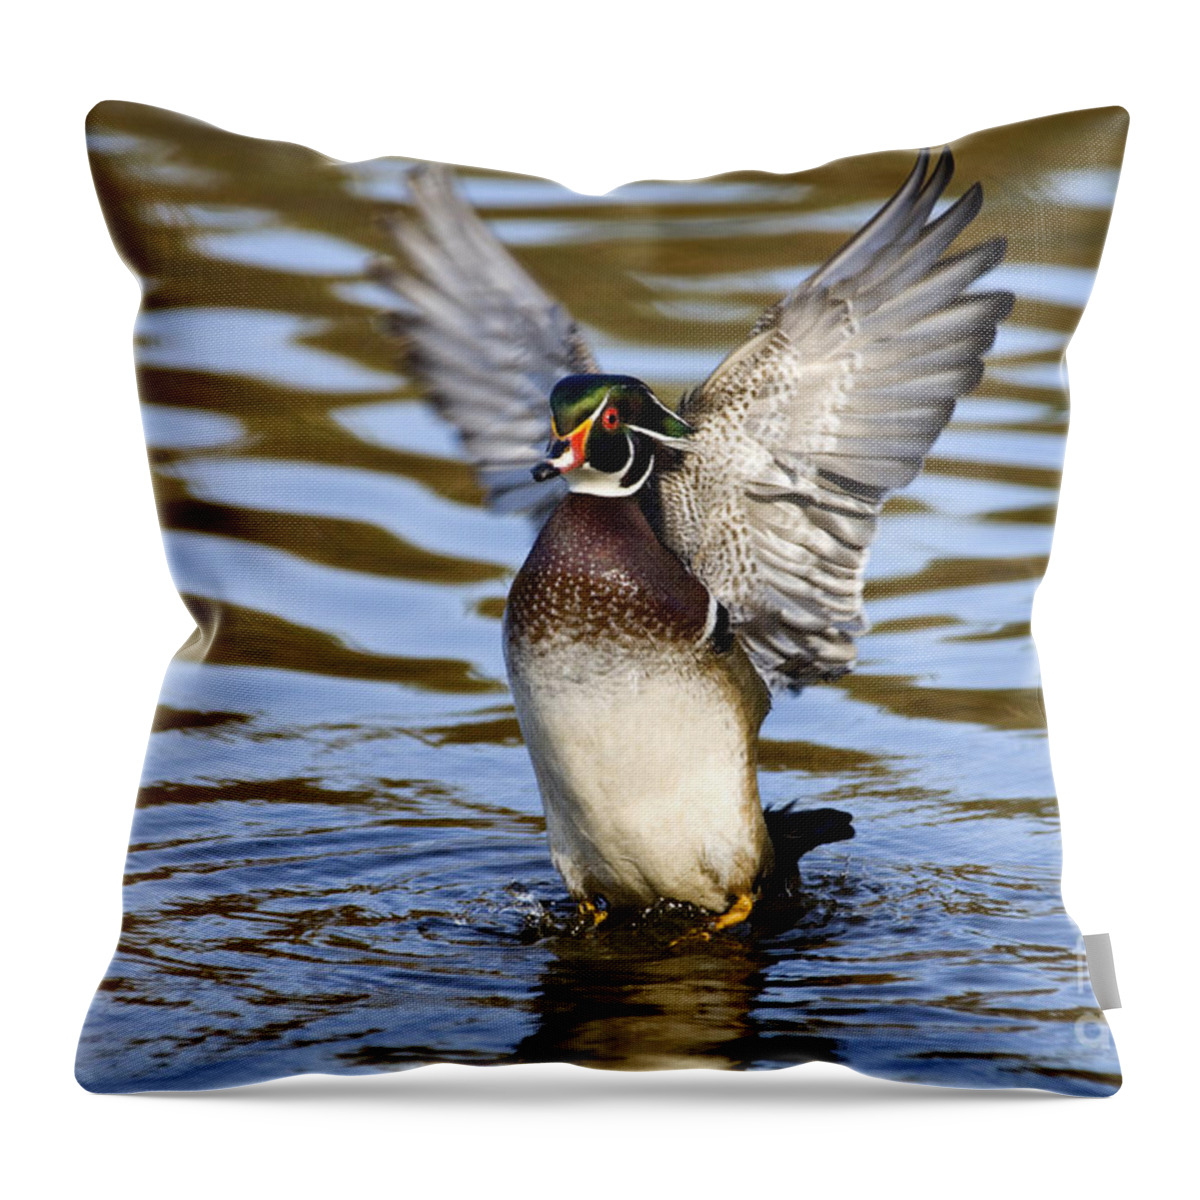 Wood Throw Pillow featuring the photograph Wood Duck - D008936a by Daniel Dempster